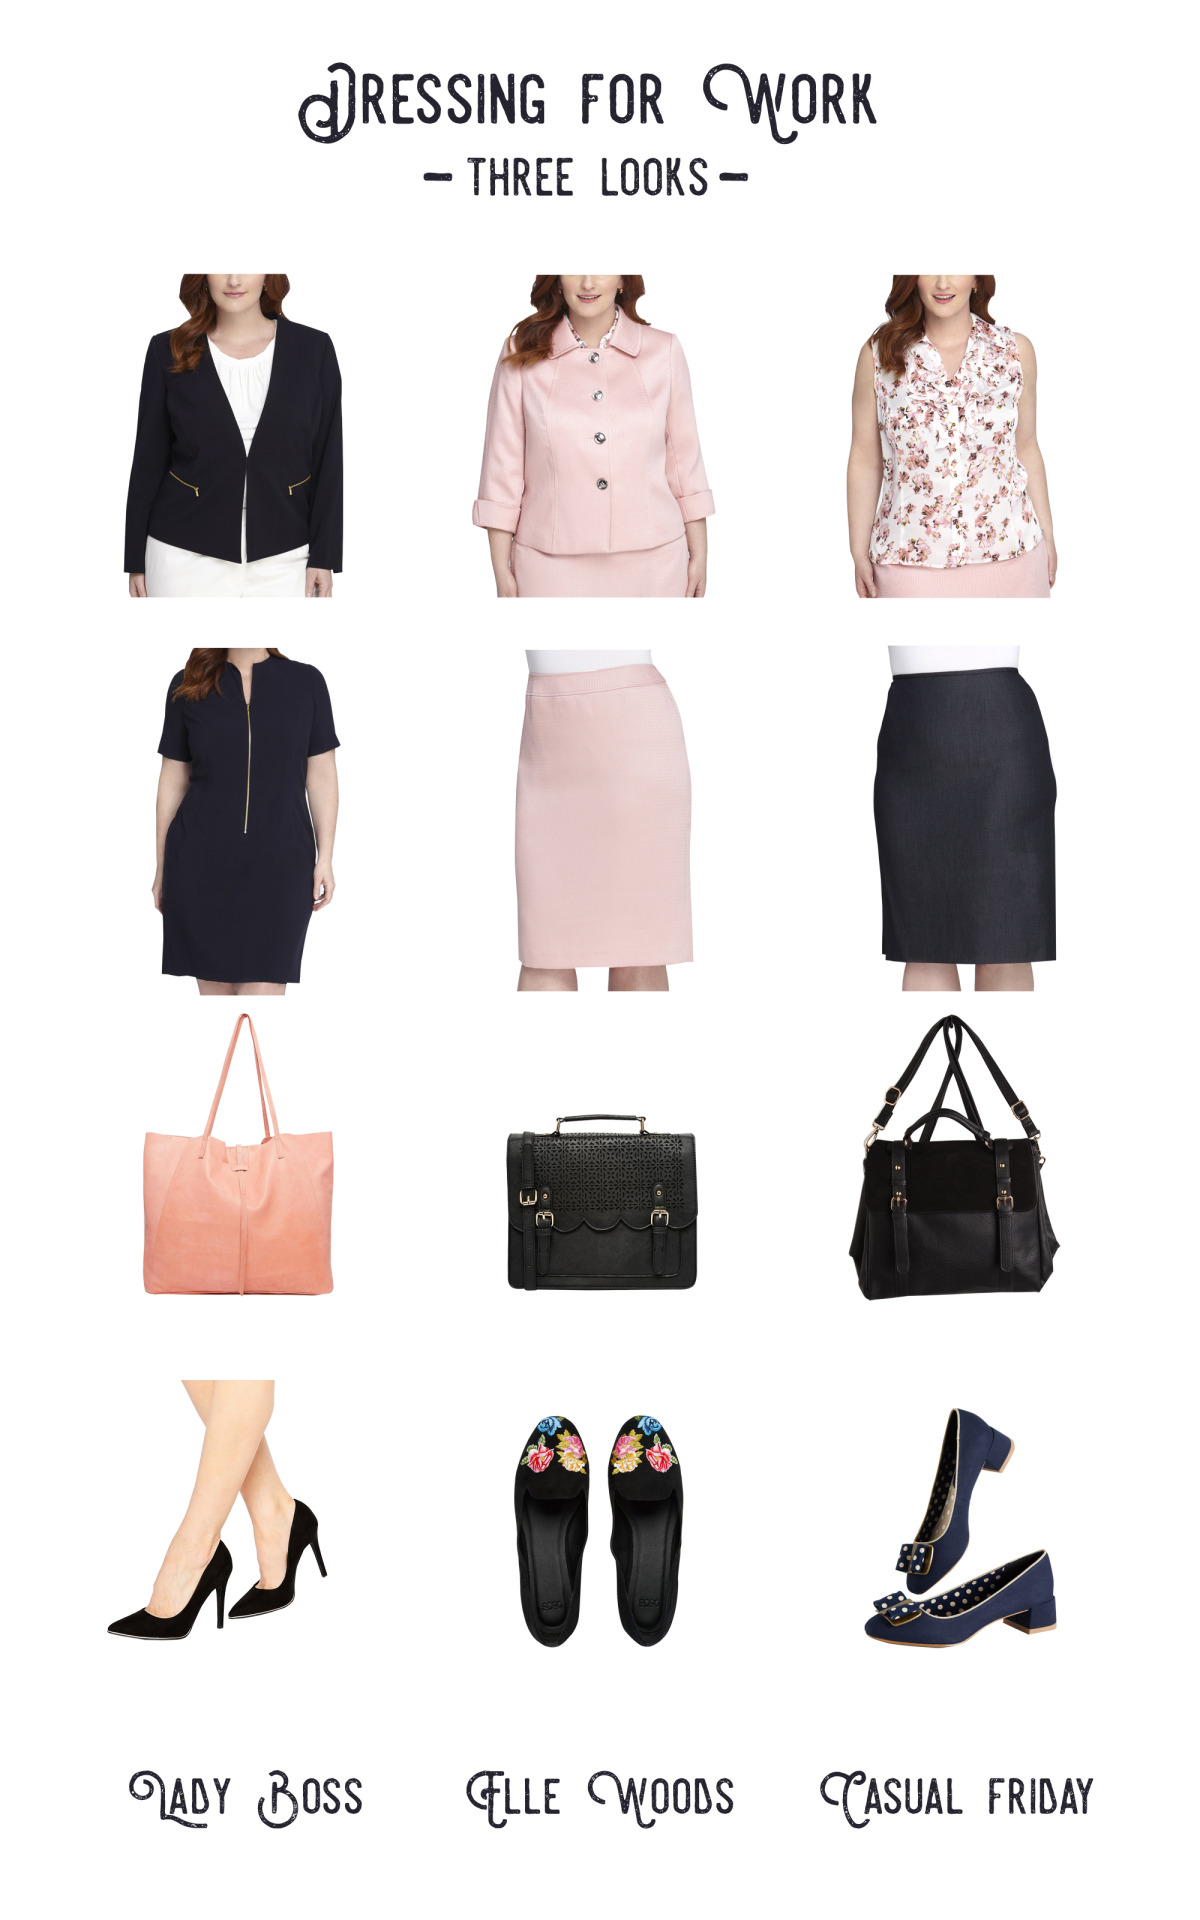 https://curiousfancy.com/wp-content/uploads/2019/01/dressing-for-work-with-tahari-asl-0.jpg